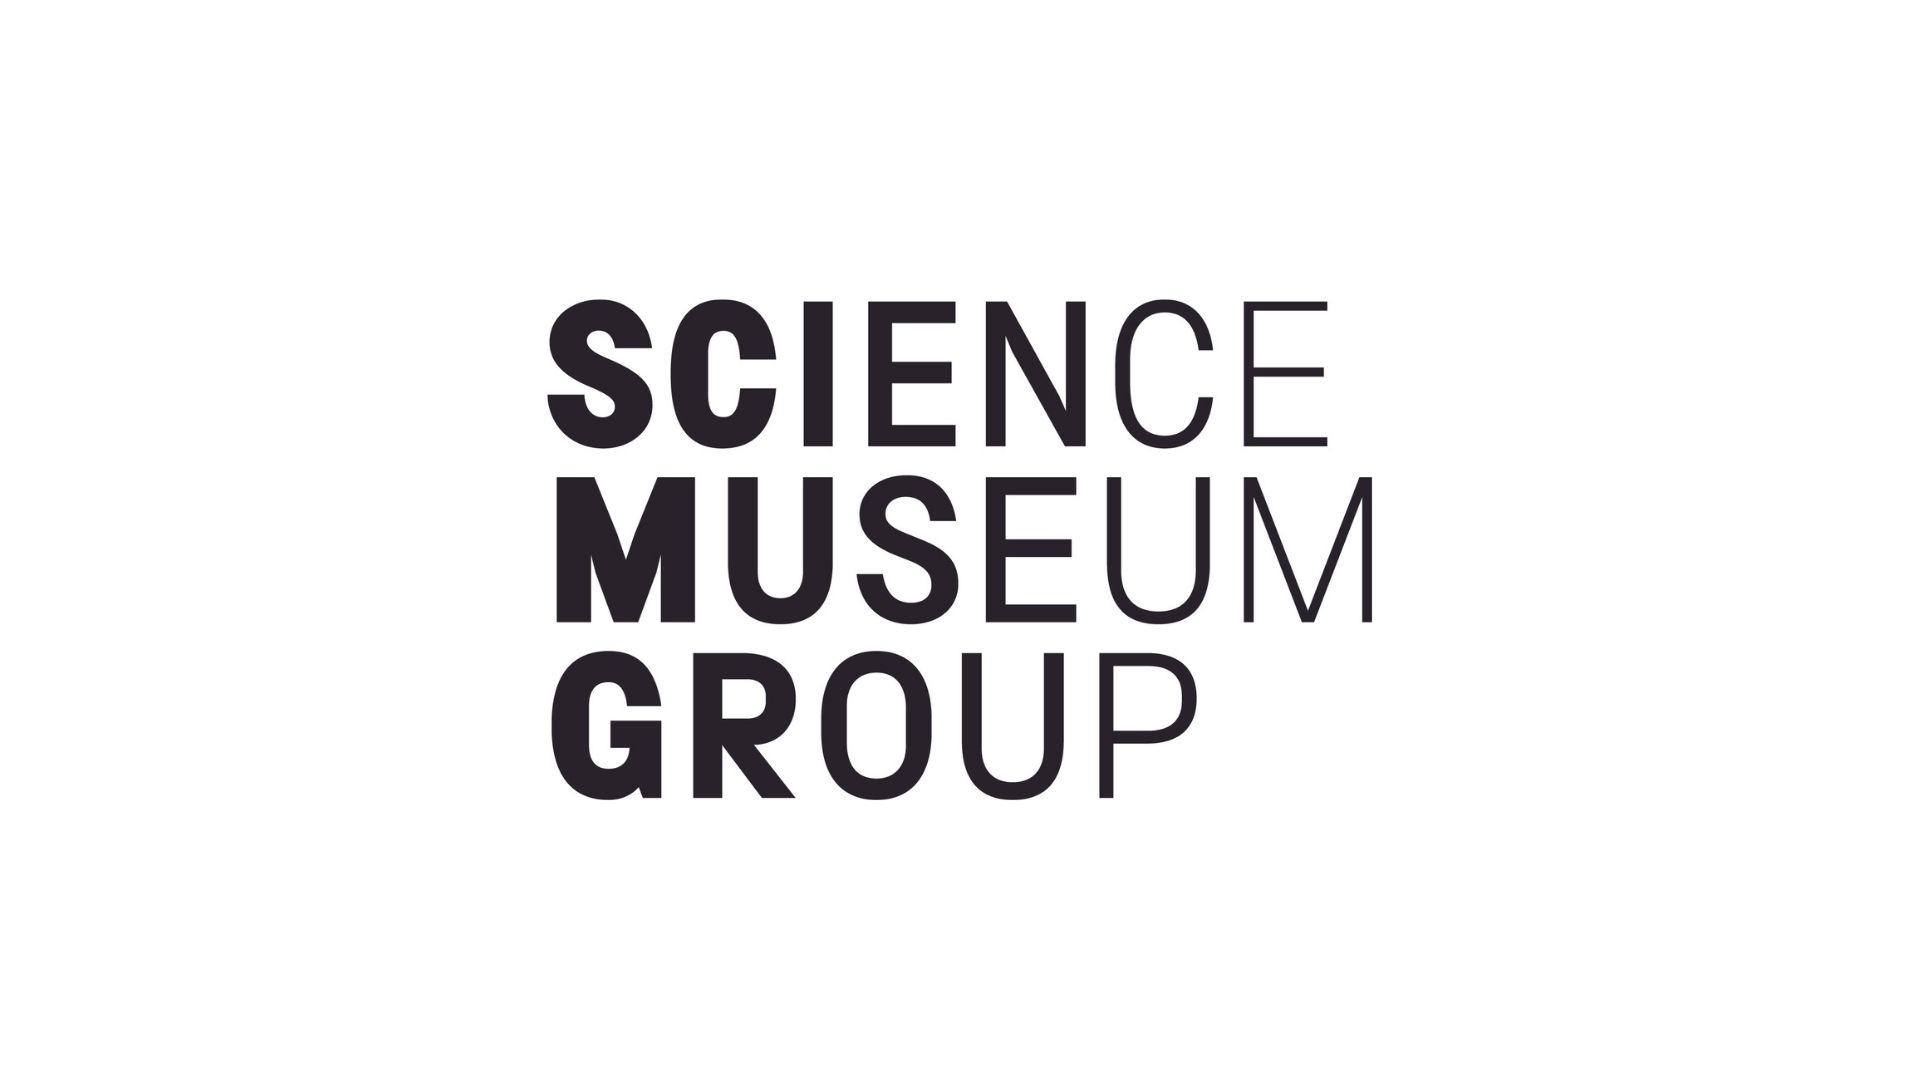 Science Museum Group"